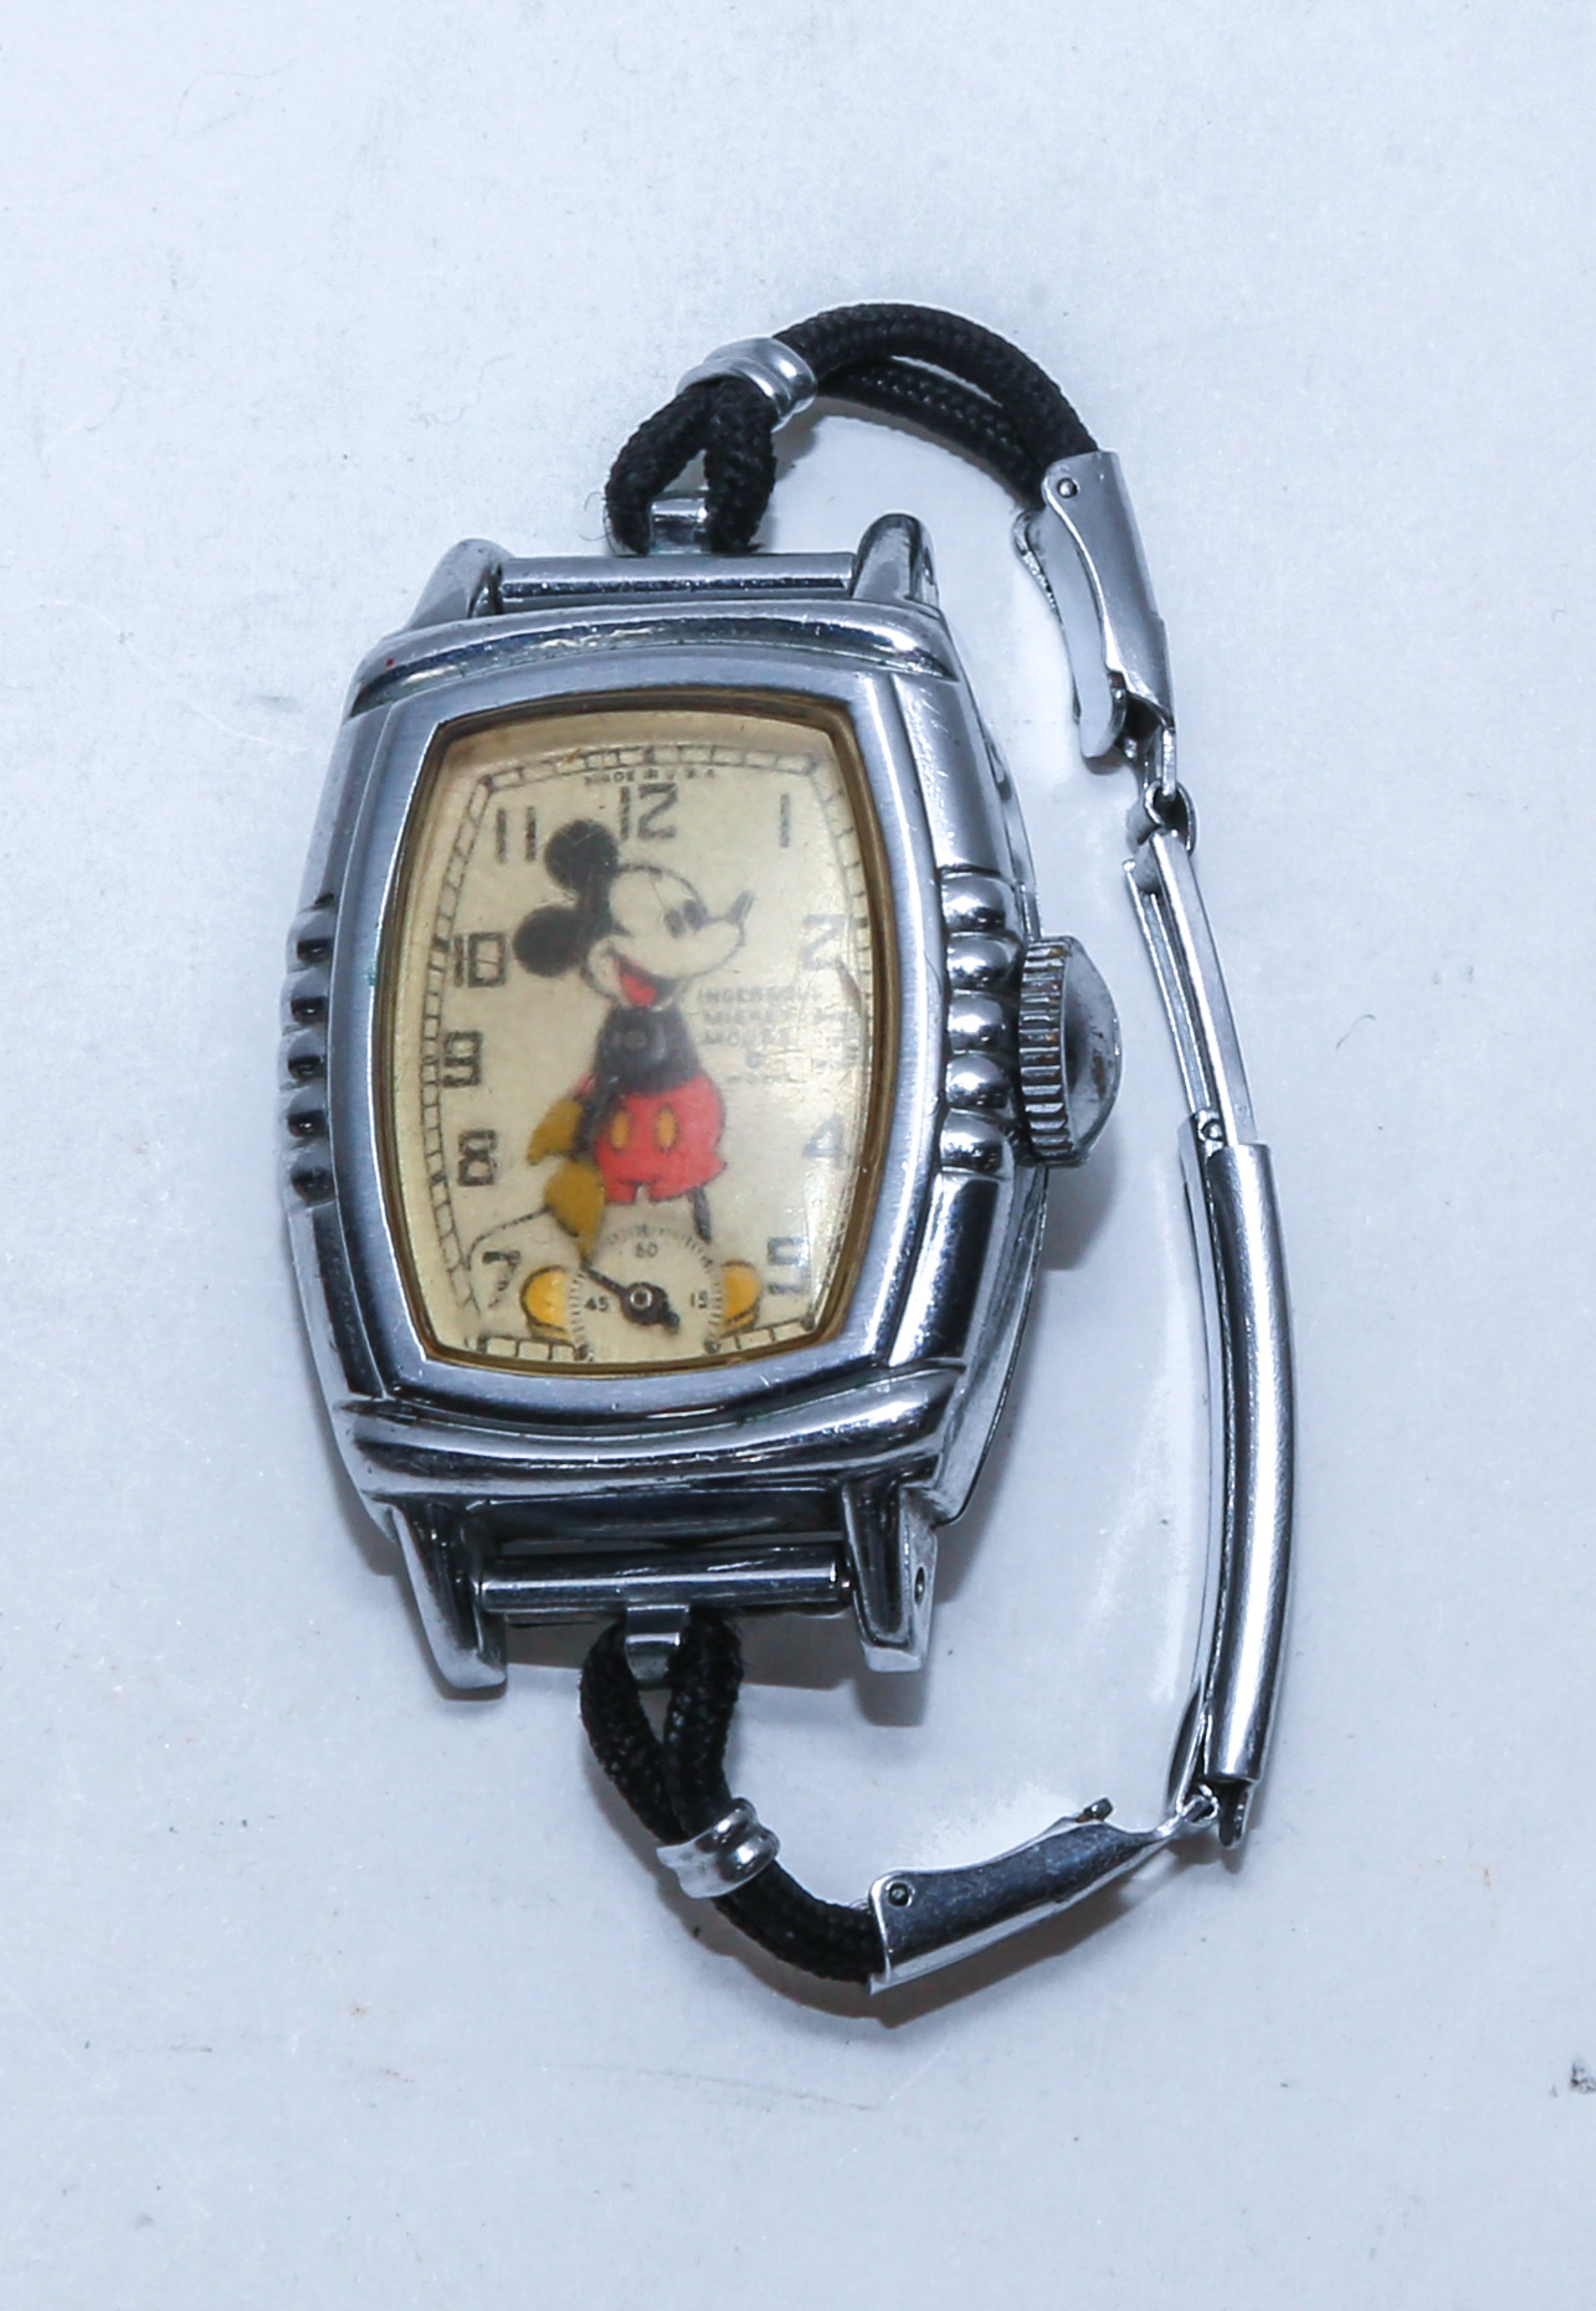 A MICKEY MOUSE WATCH BY INGERSOLL 3b2653